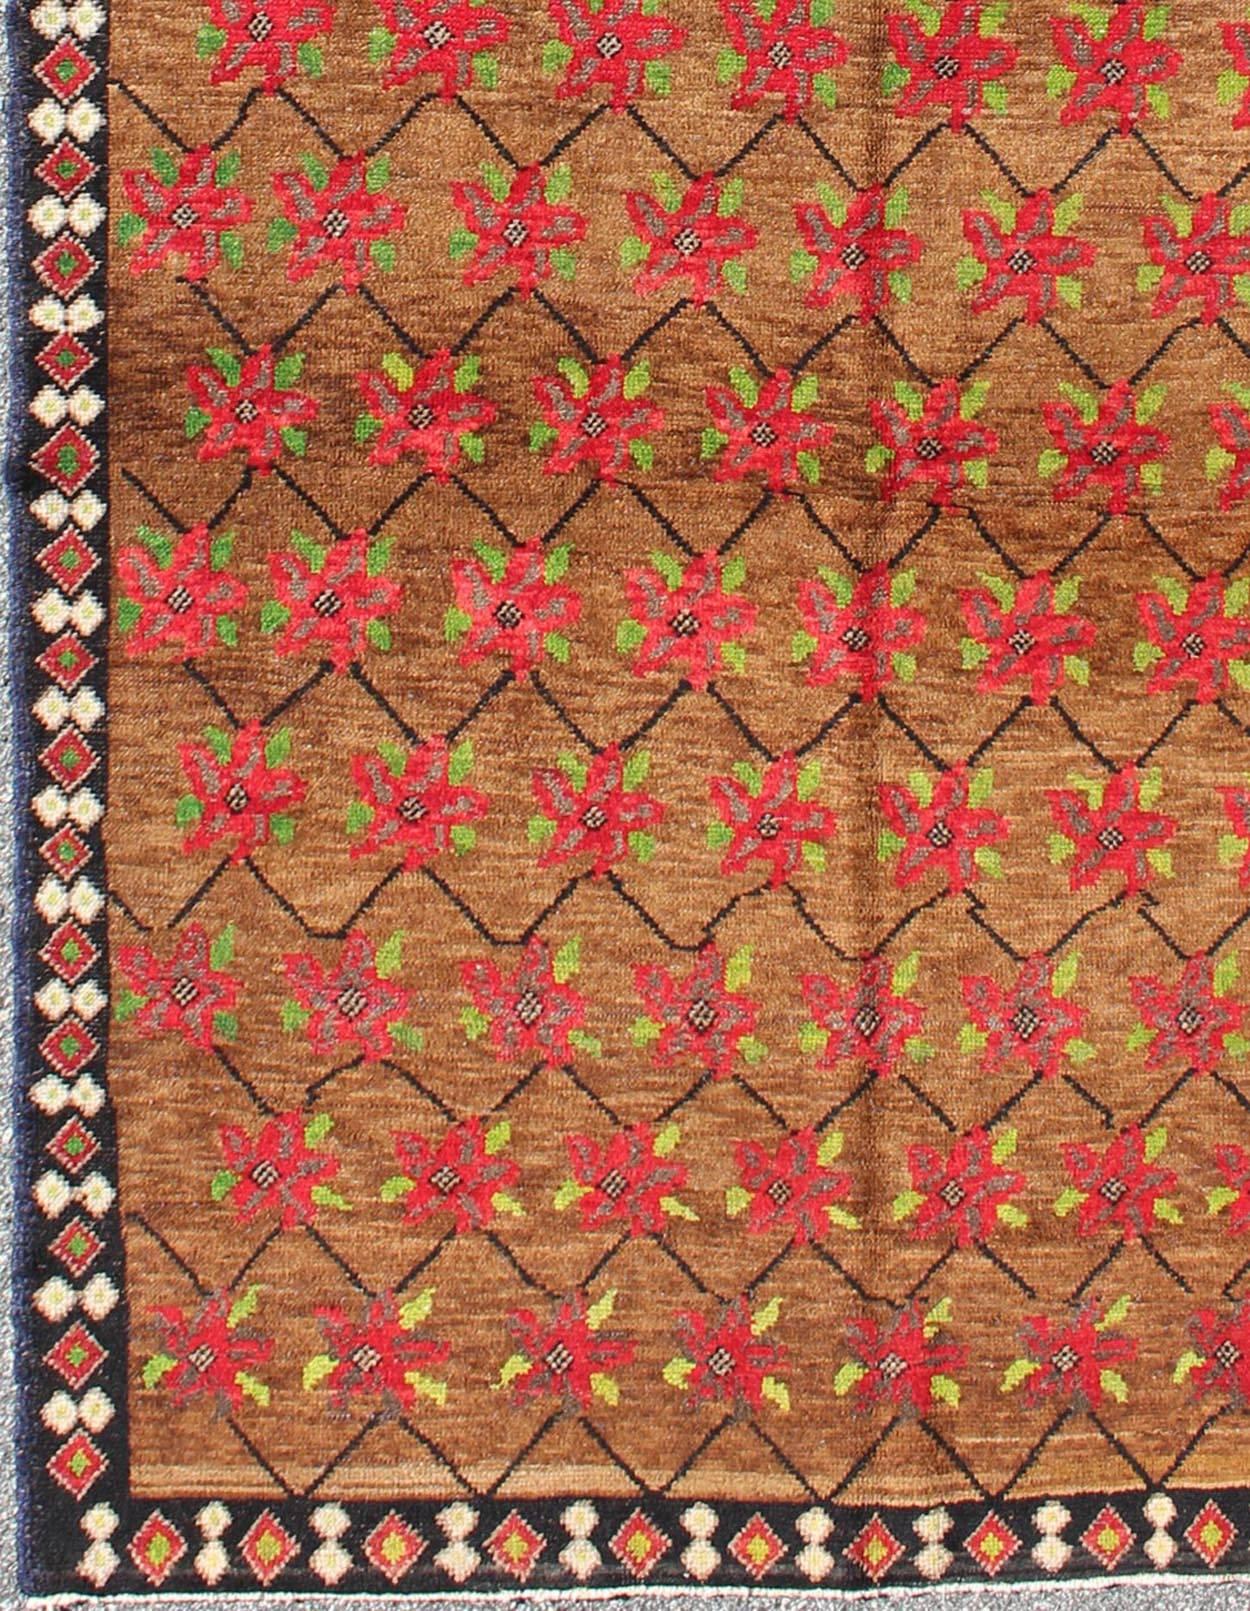 Poinsettia Design Oushak Turkish Rug with Flowers
rug/tu-mtu-3316, origin/turkey

This unique Turkish Oushak features an all-over design of vibrant poinsettias, connected by intersecting charcoal-colored lines and set atop a central light brown